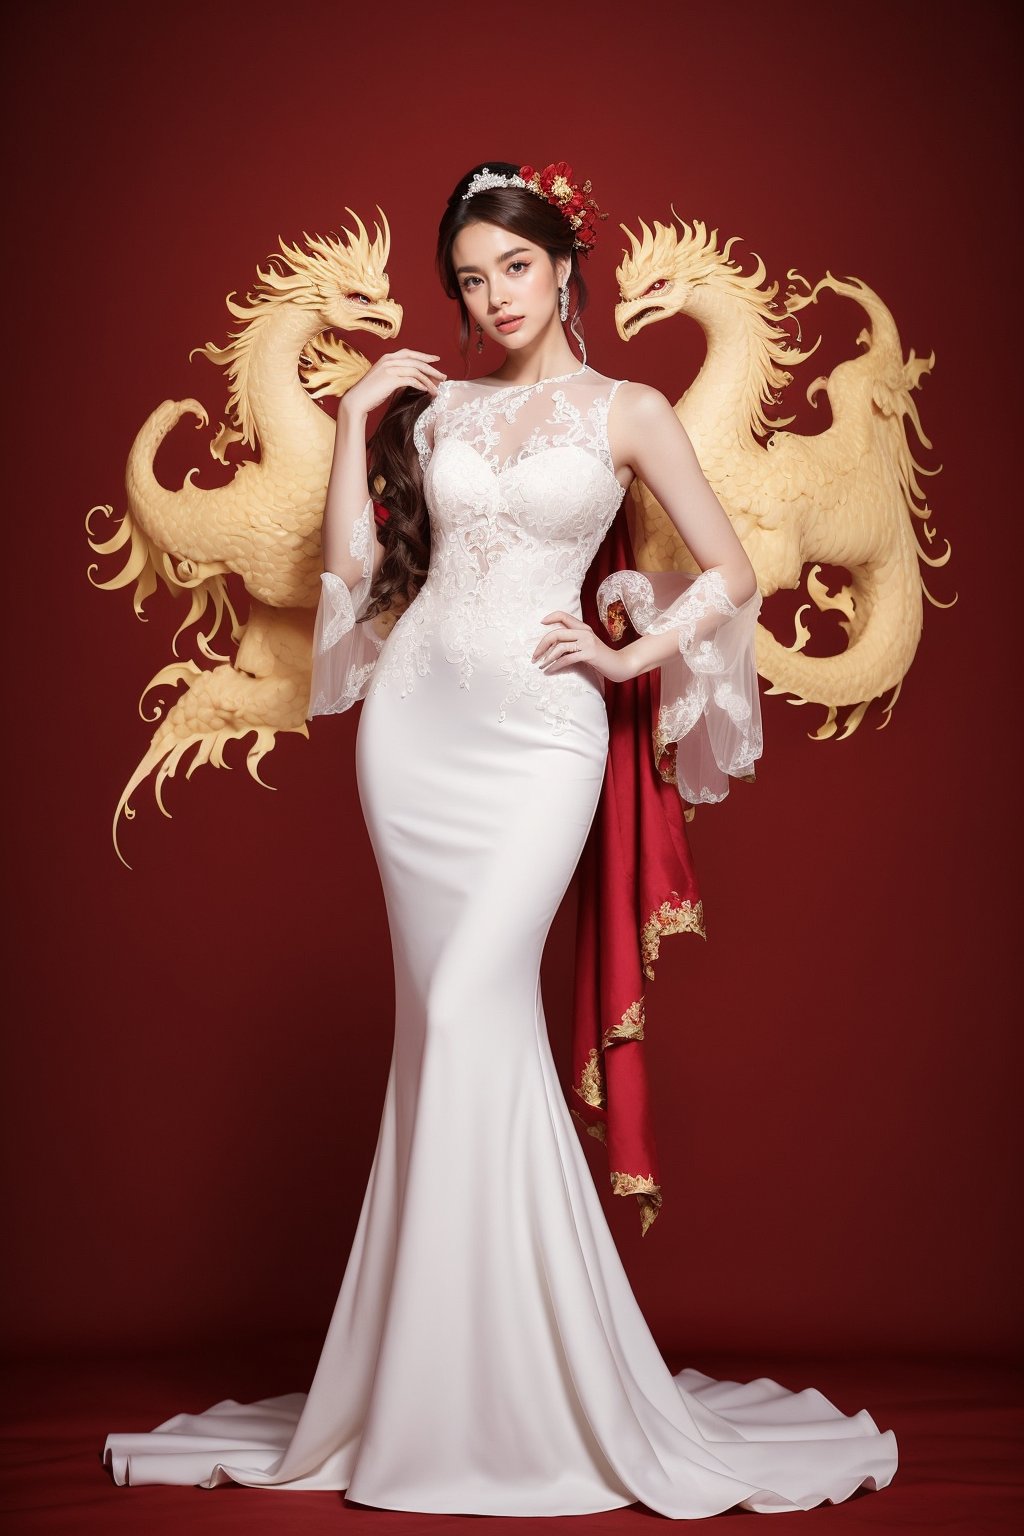 A charming portrait of a stunning bride: girl with wavy hair, body proportions 1:3. Her red silk Chinese style dragon and phoenix bridal gown glowed against a clear, vibrant background. The bride's elegant and intricate bridal hairstyle draws attention to her toned legs and alluring physique as she stands confidently in the camera.